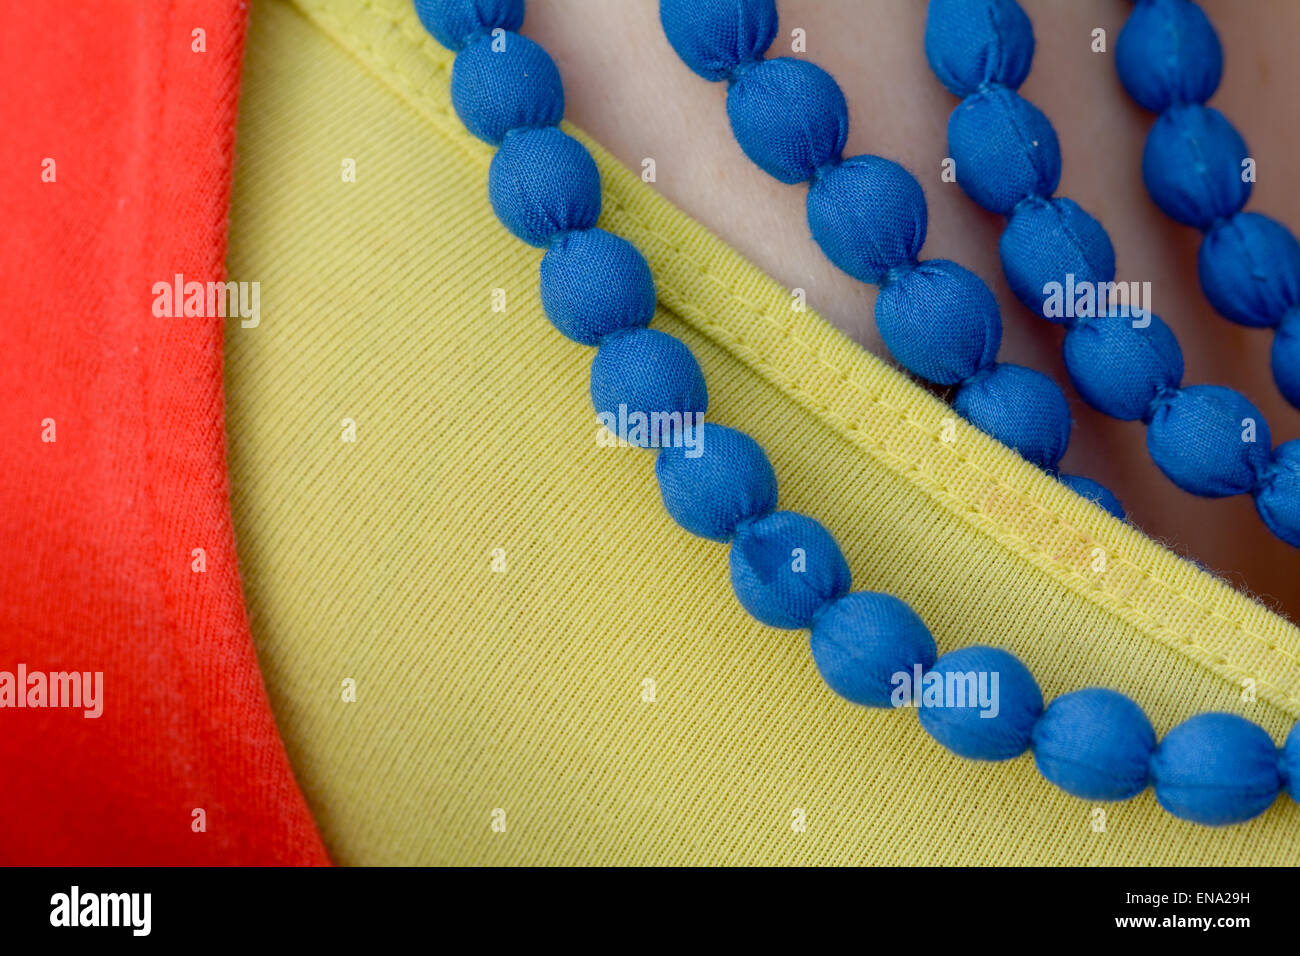 Blue beaded type necklace worn with yellow top and red cardigan Stock Photo